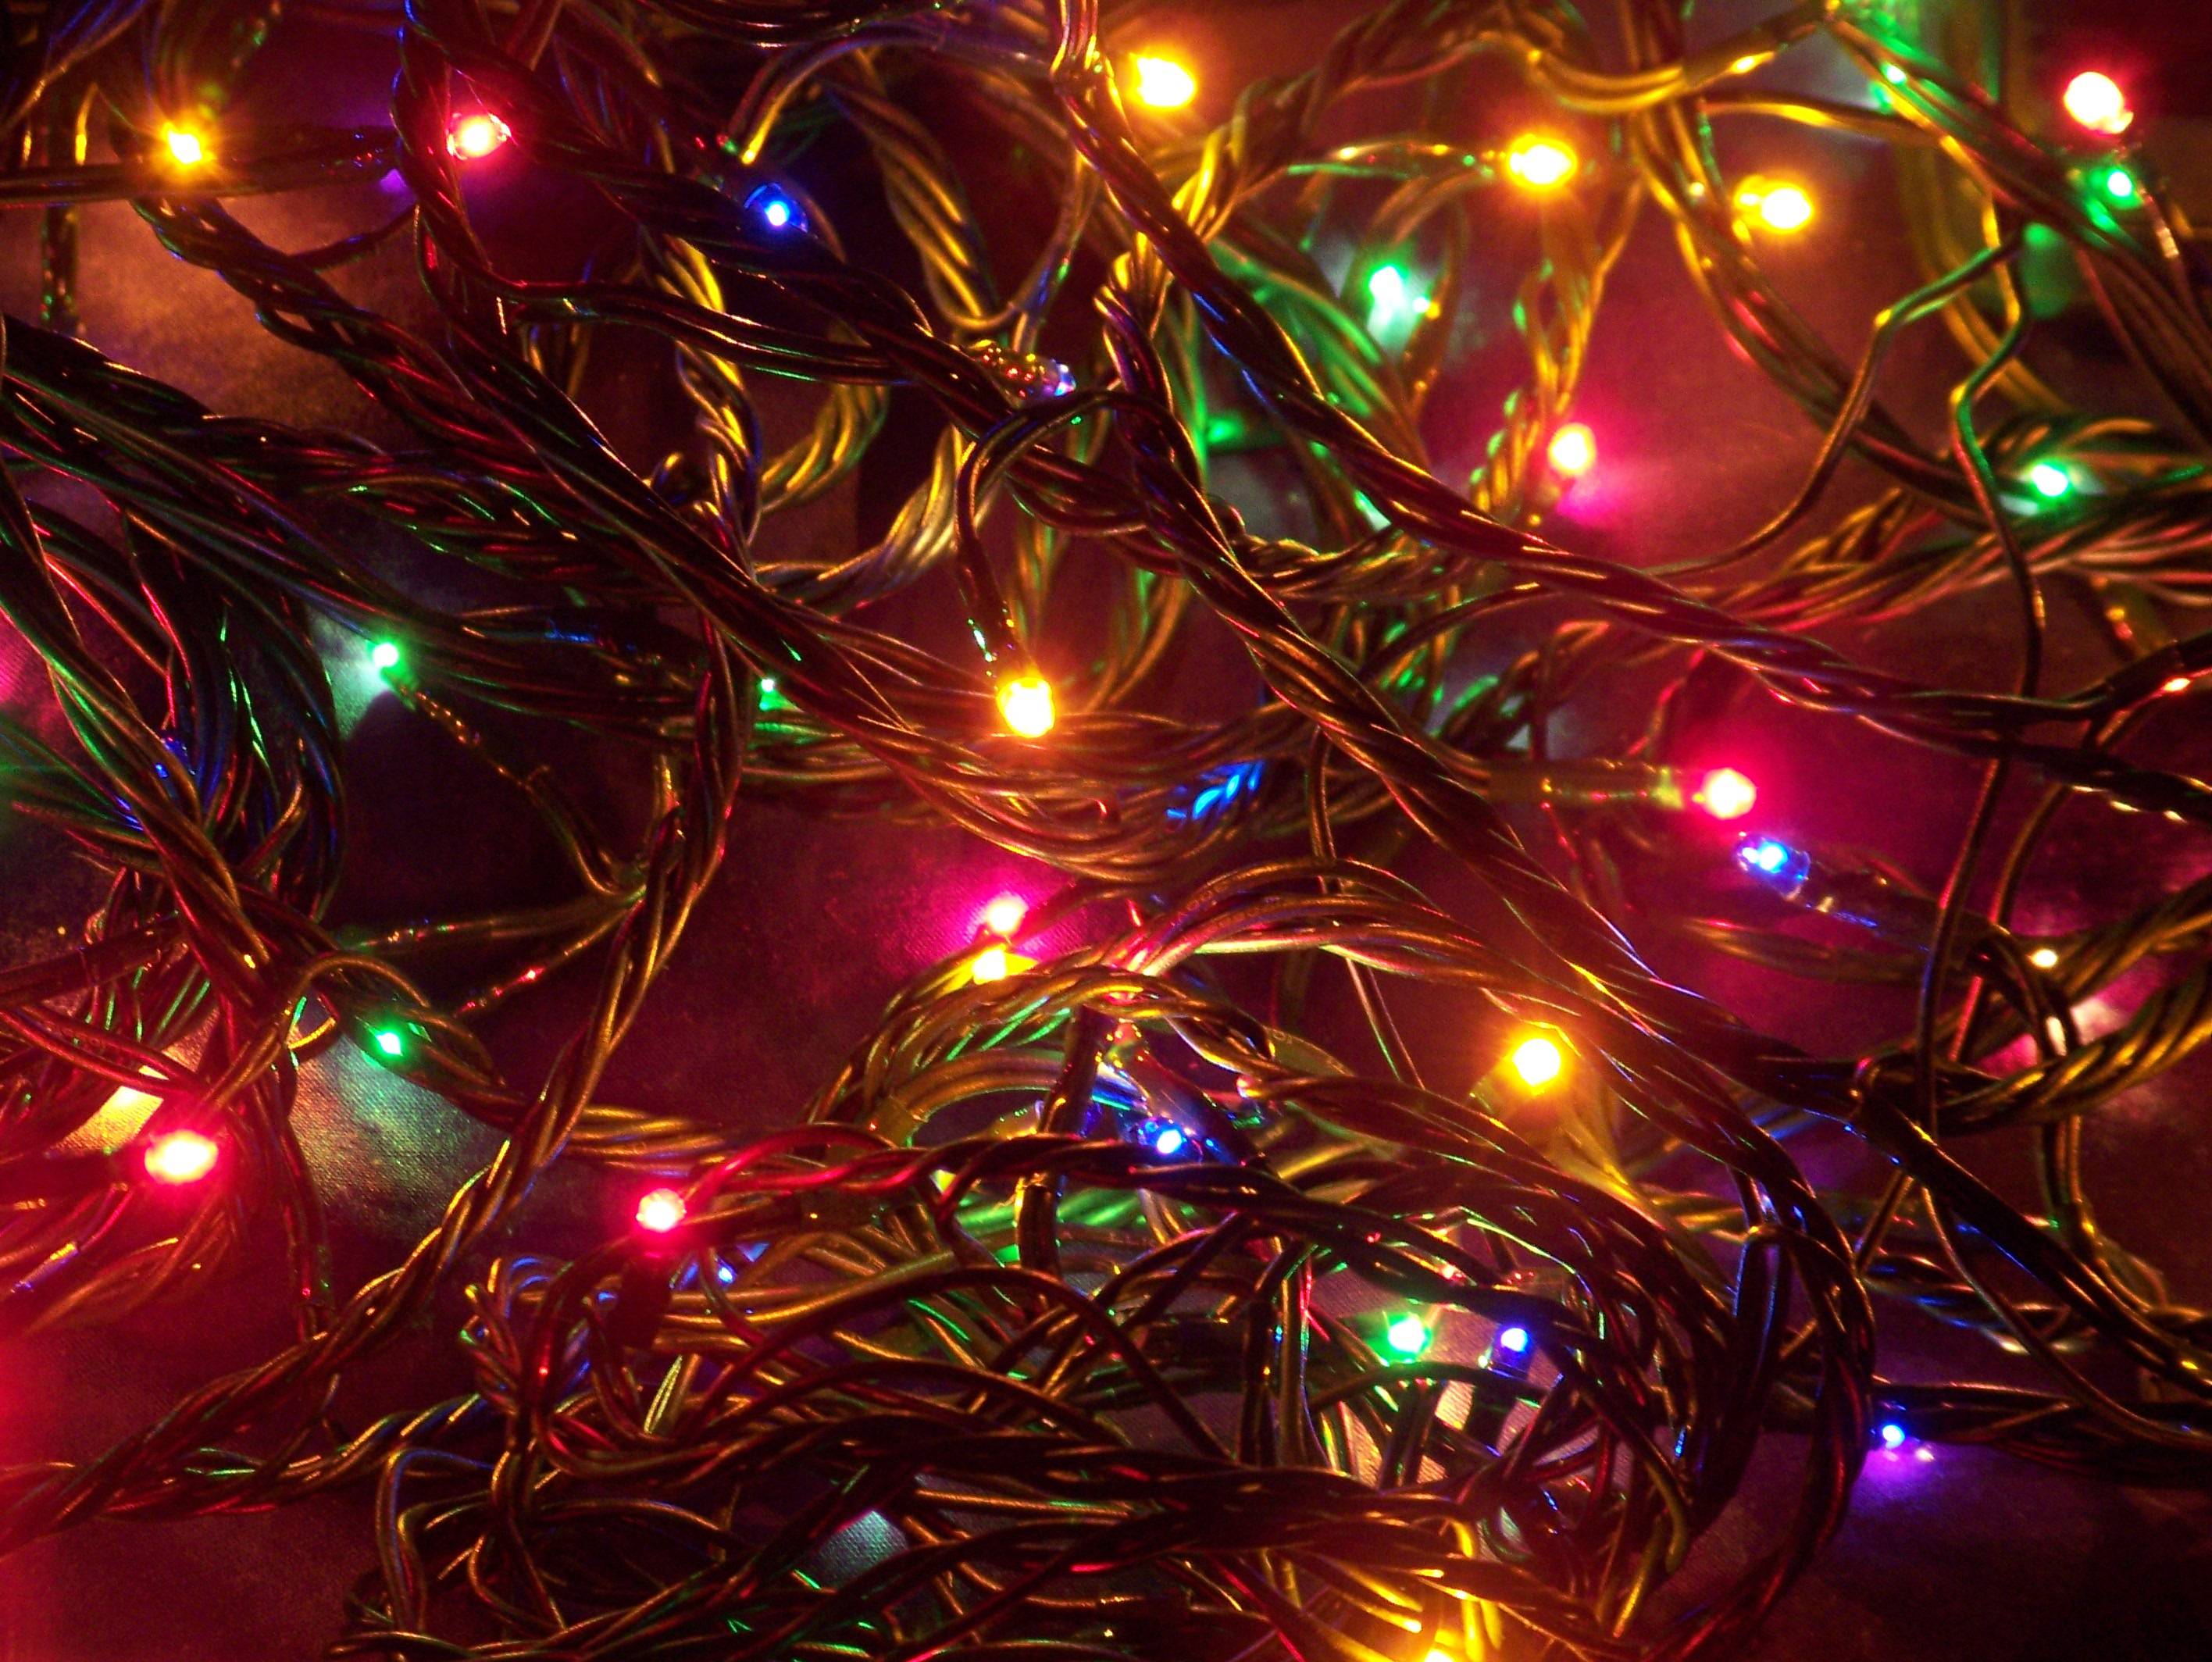 Xmas Stuff For > Christmas Lights And Ornaments Background